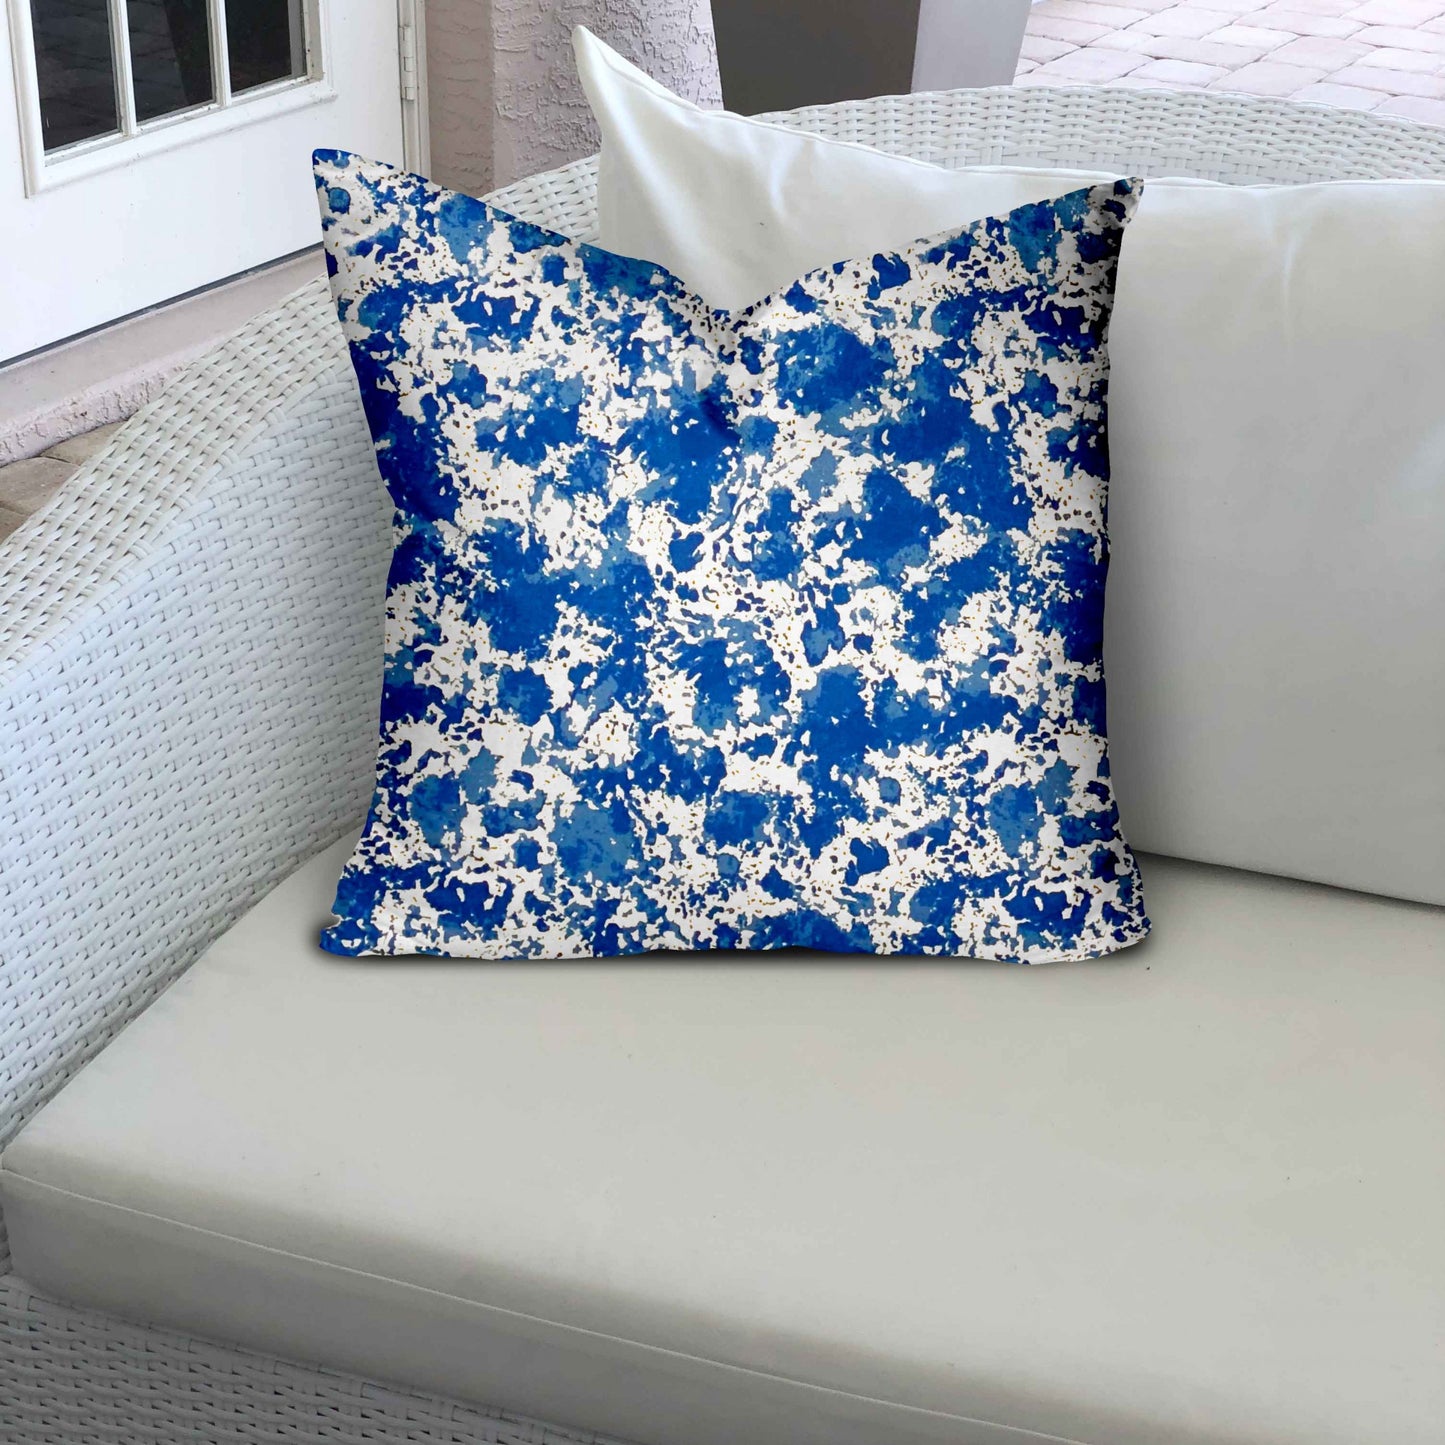 20" X 20" Blue And White Zippered Coastal Throw Indoor Outdoor Pillow Cover